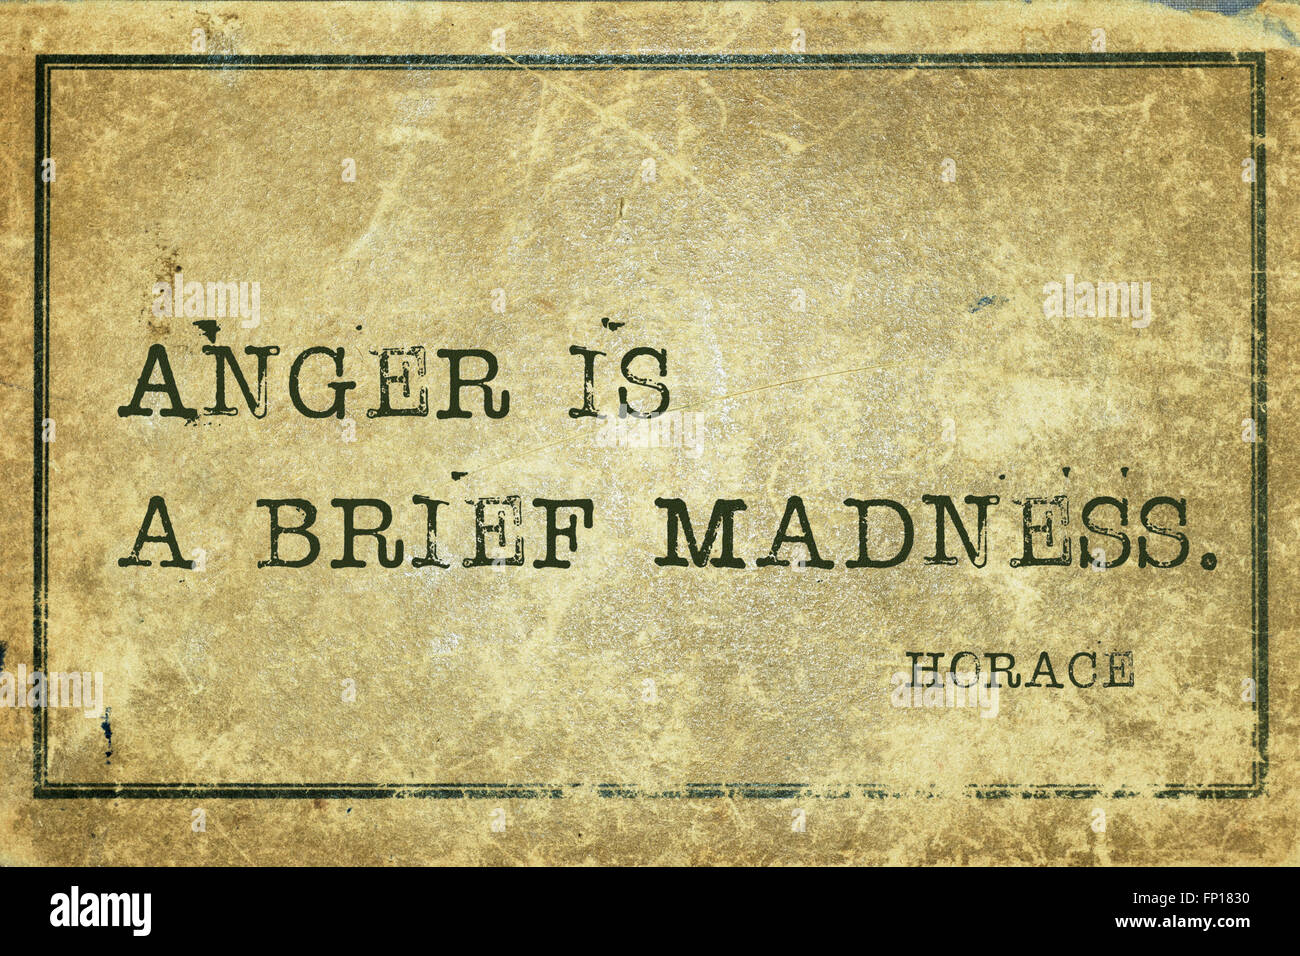 Anger is a brief madness - ancient Roman poet Horace quote printed on grunge vintage cardboard Stock Photo